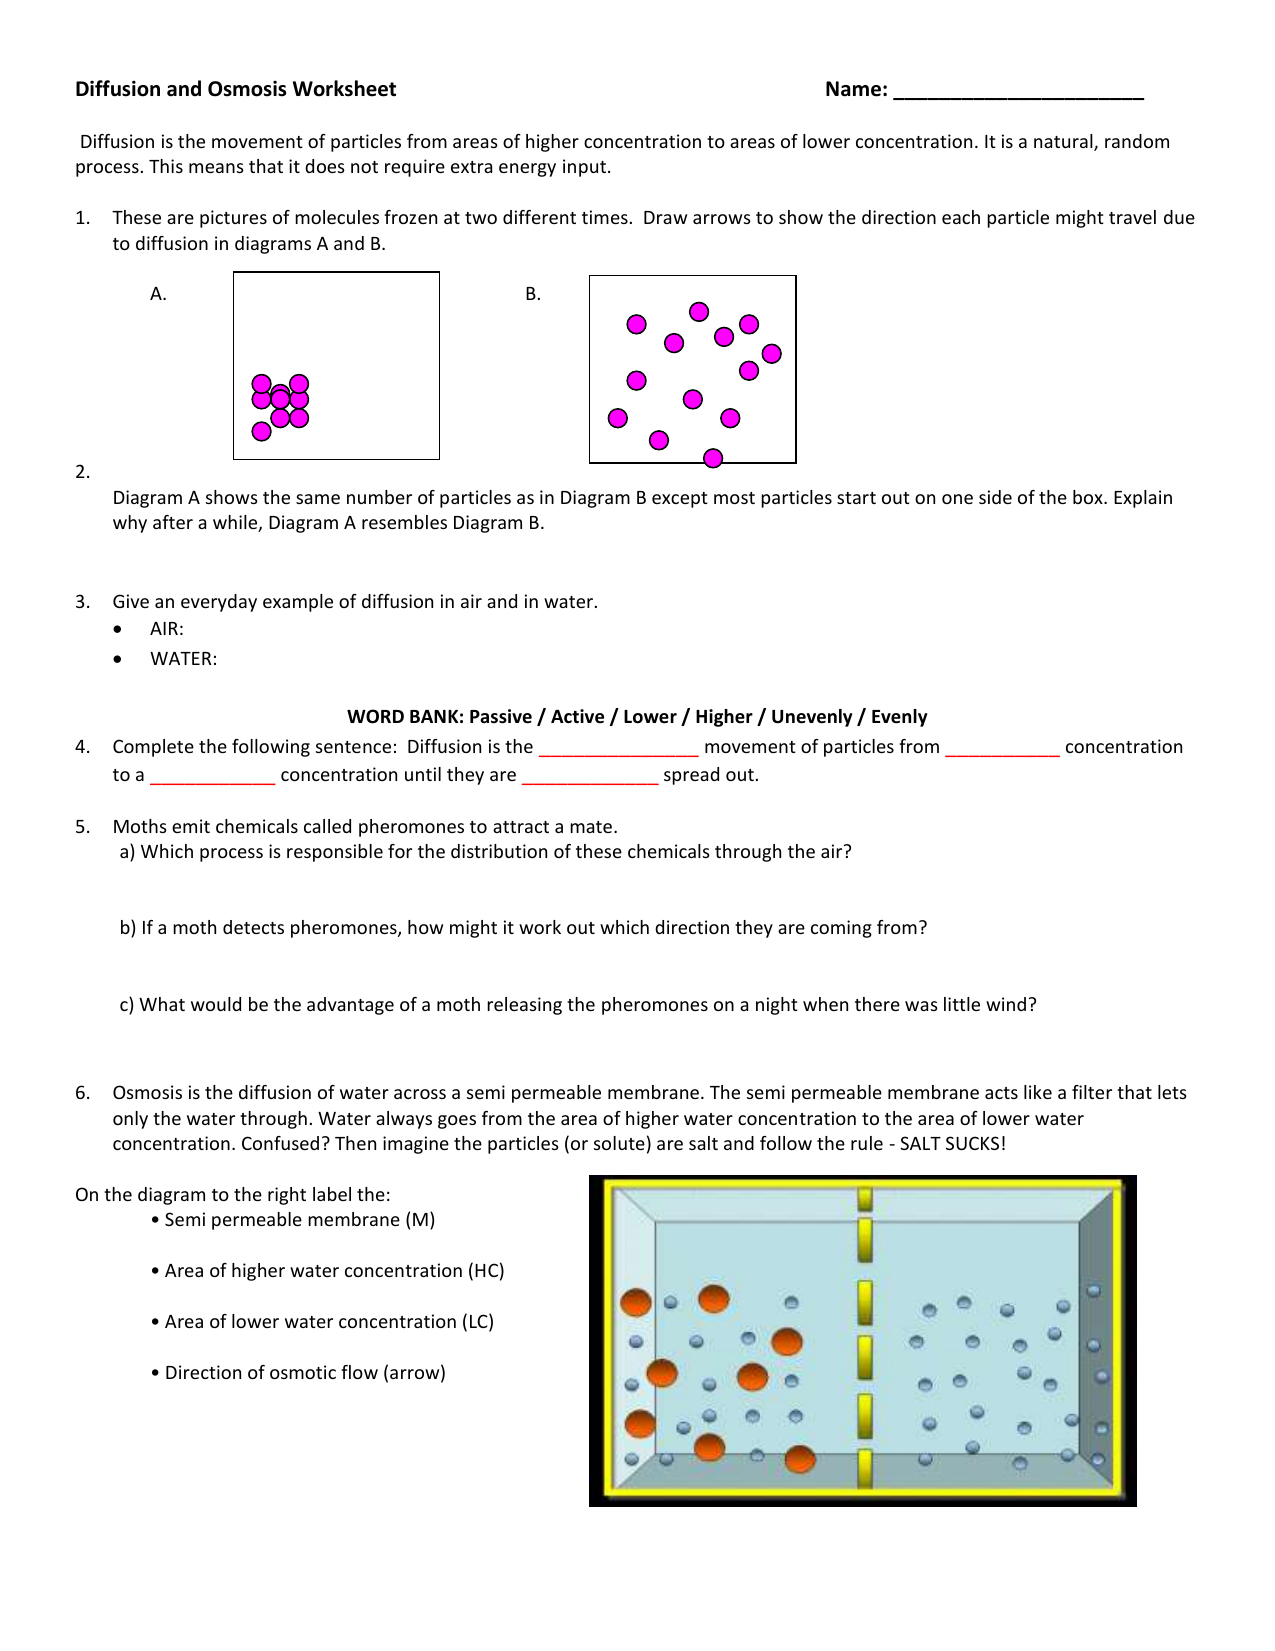 Diffusion And Osmosis Worksheet Answers db excel com